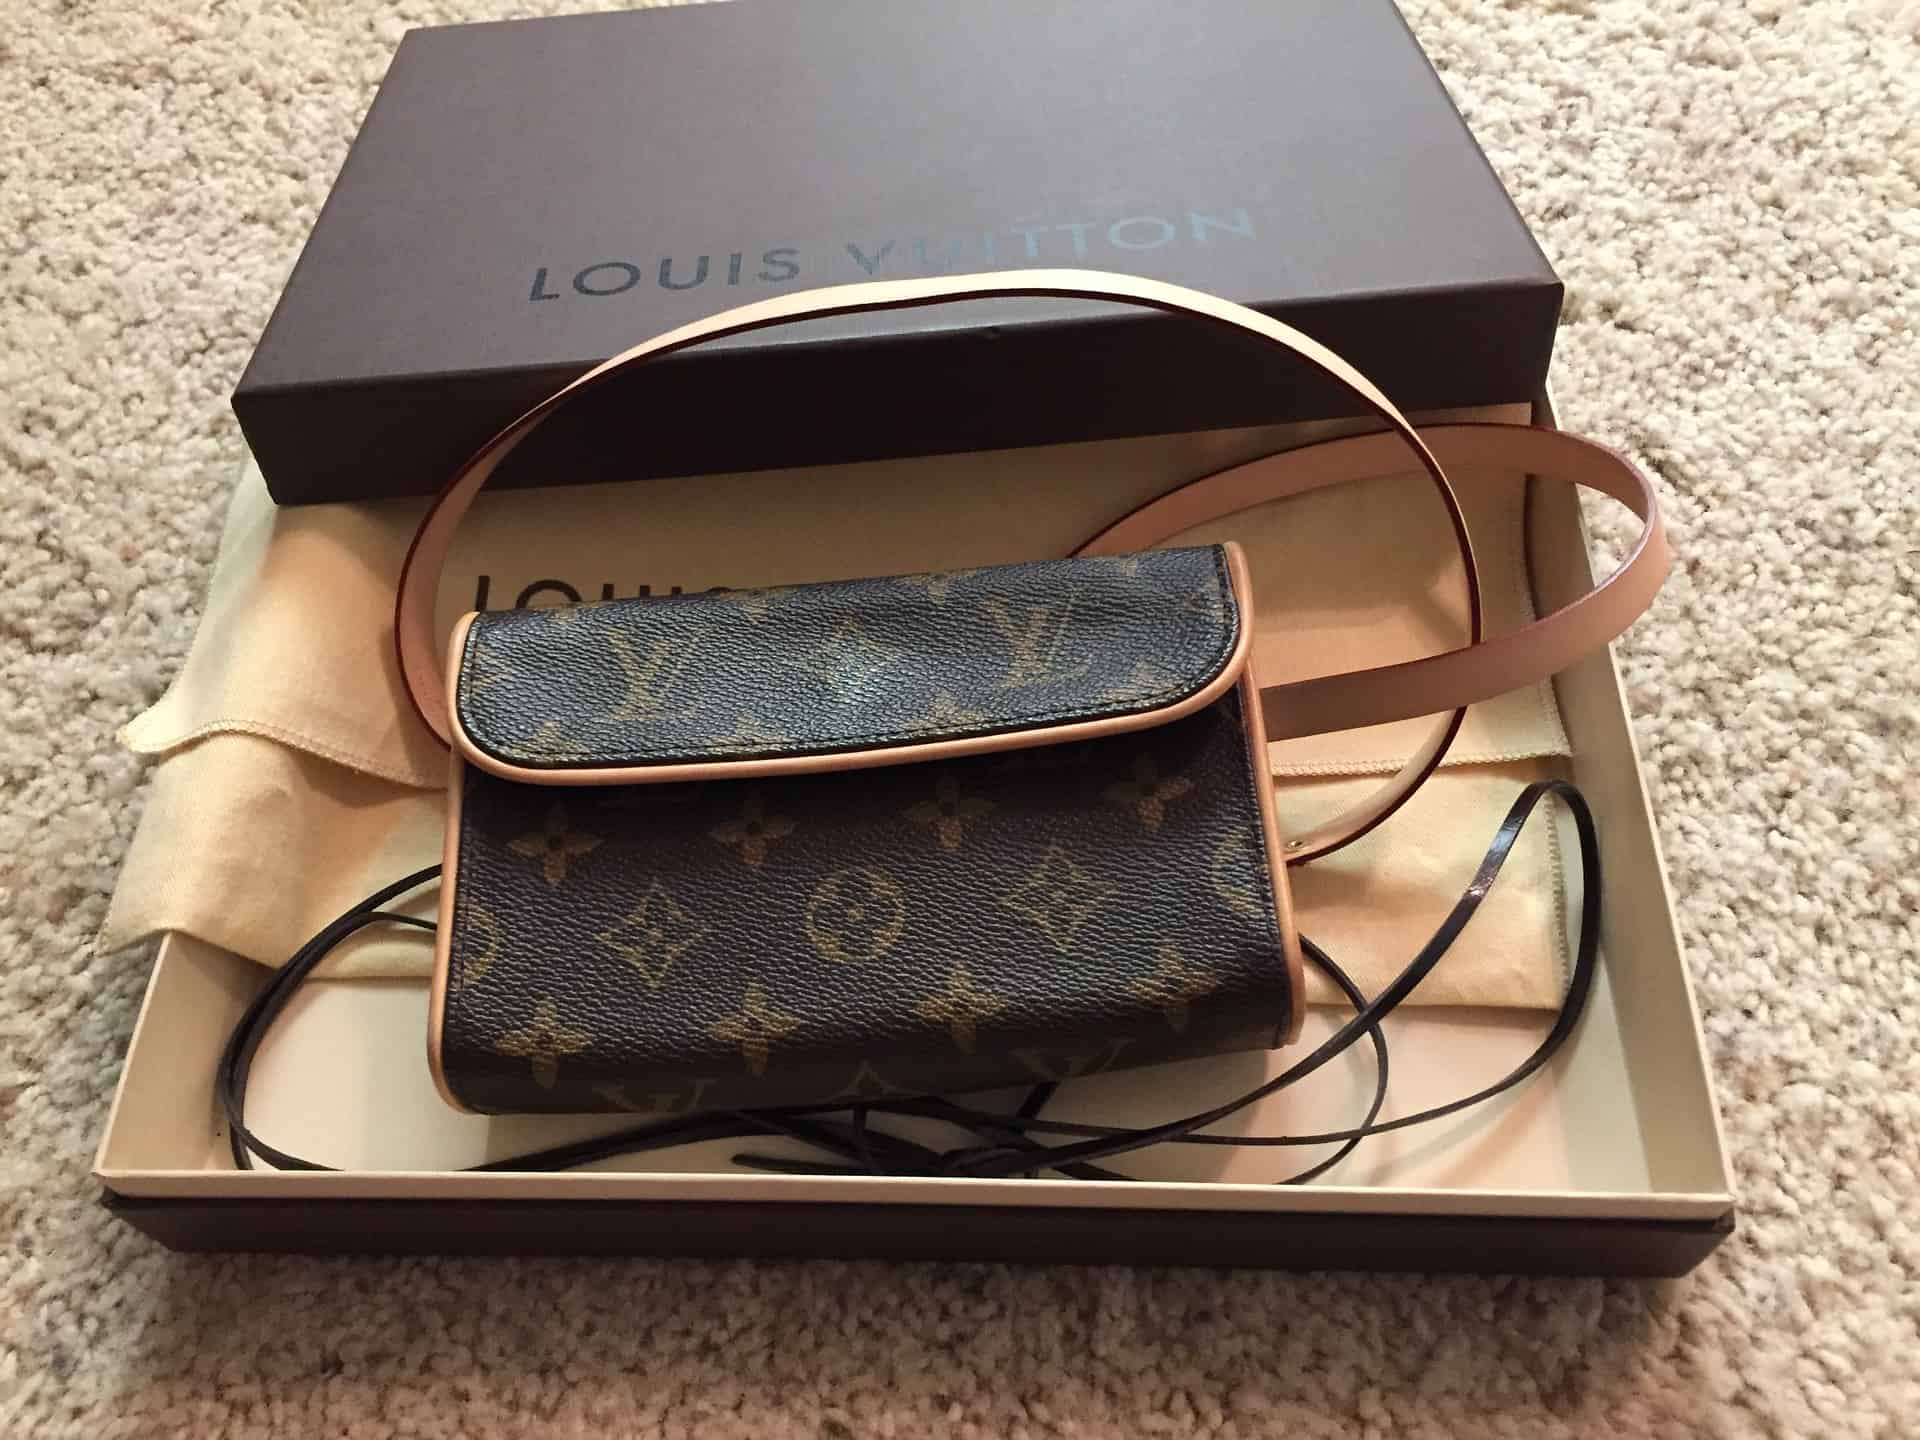 How To Buy Authentic Louis Vuitton Bags From Japan On eBay